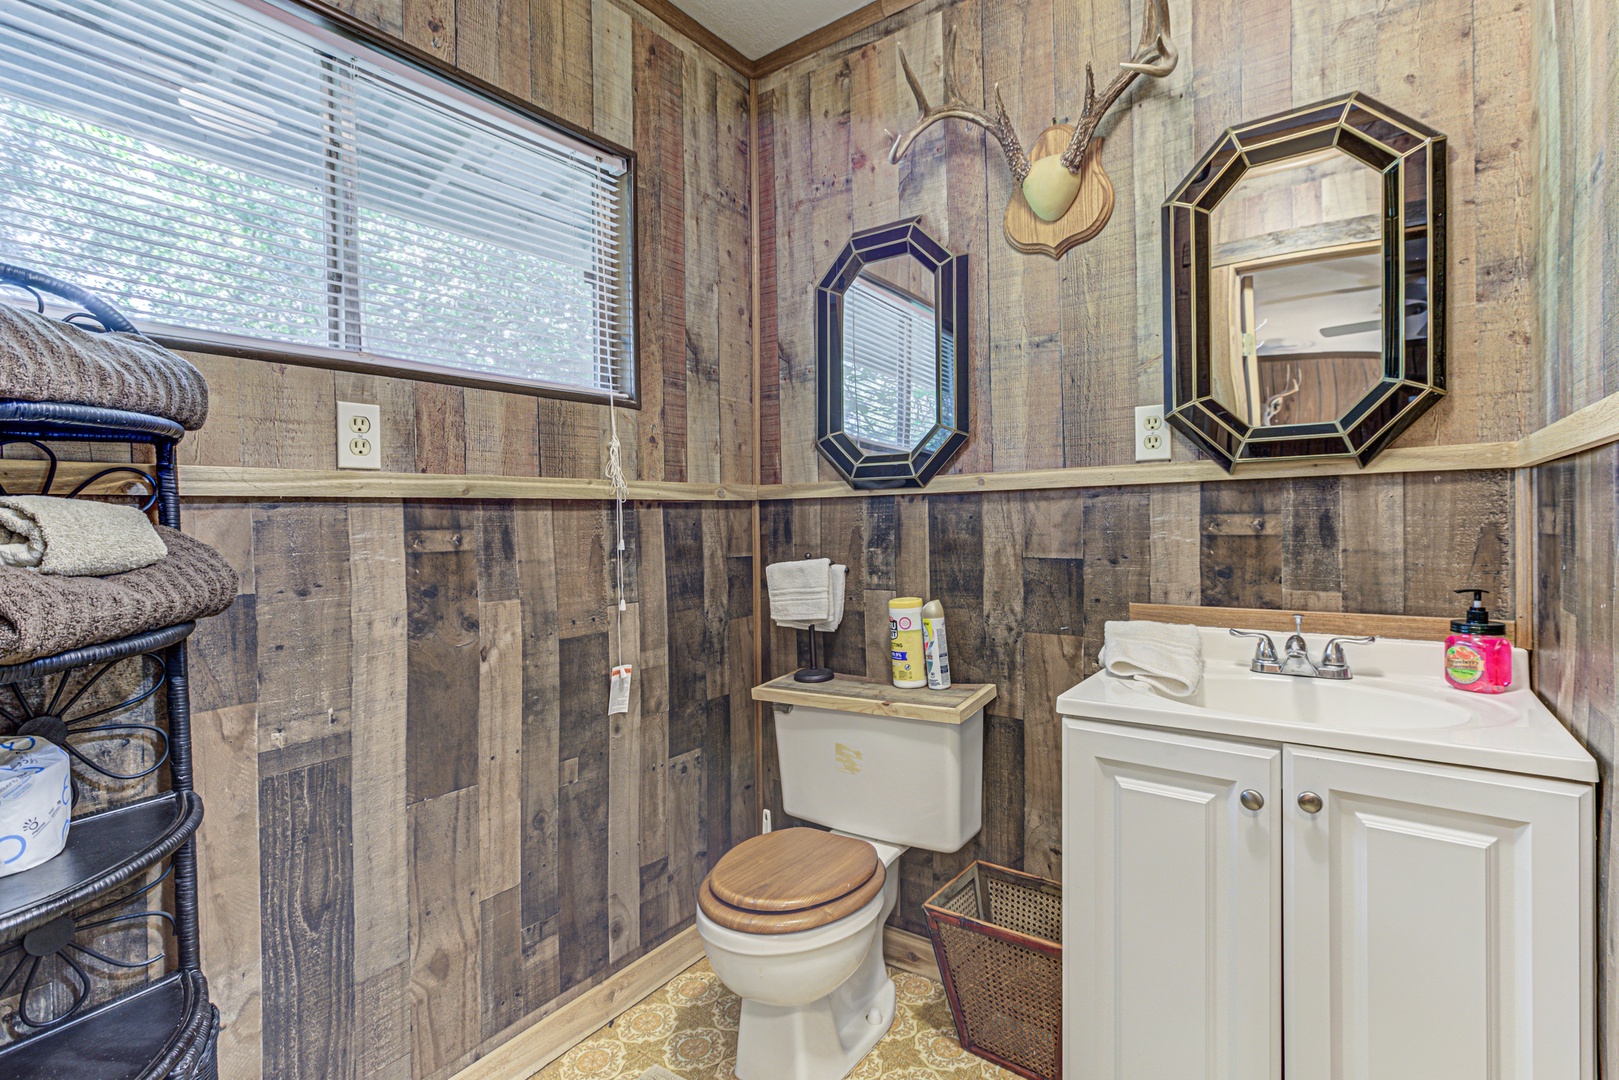 A full bath with single vanity & walk-in shower awaits in the bungalow